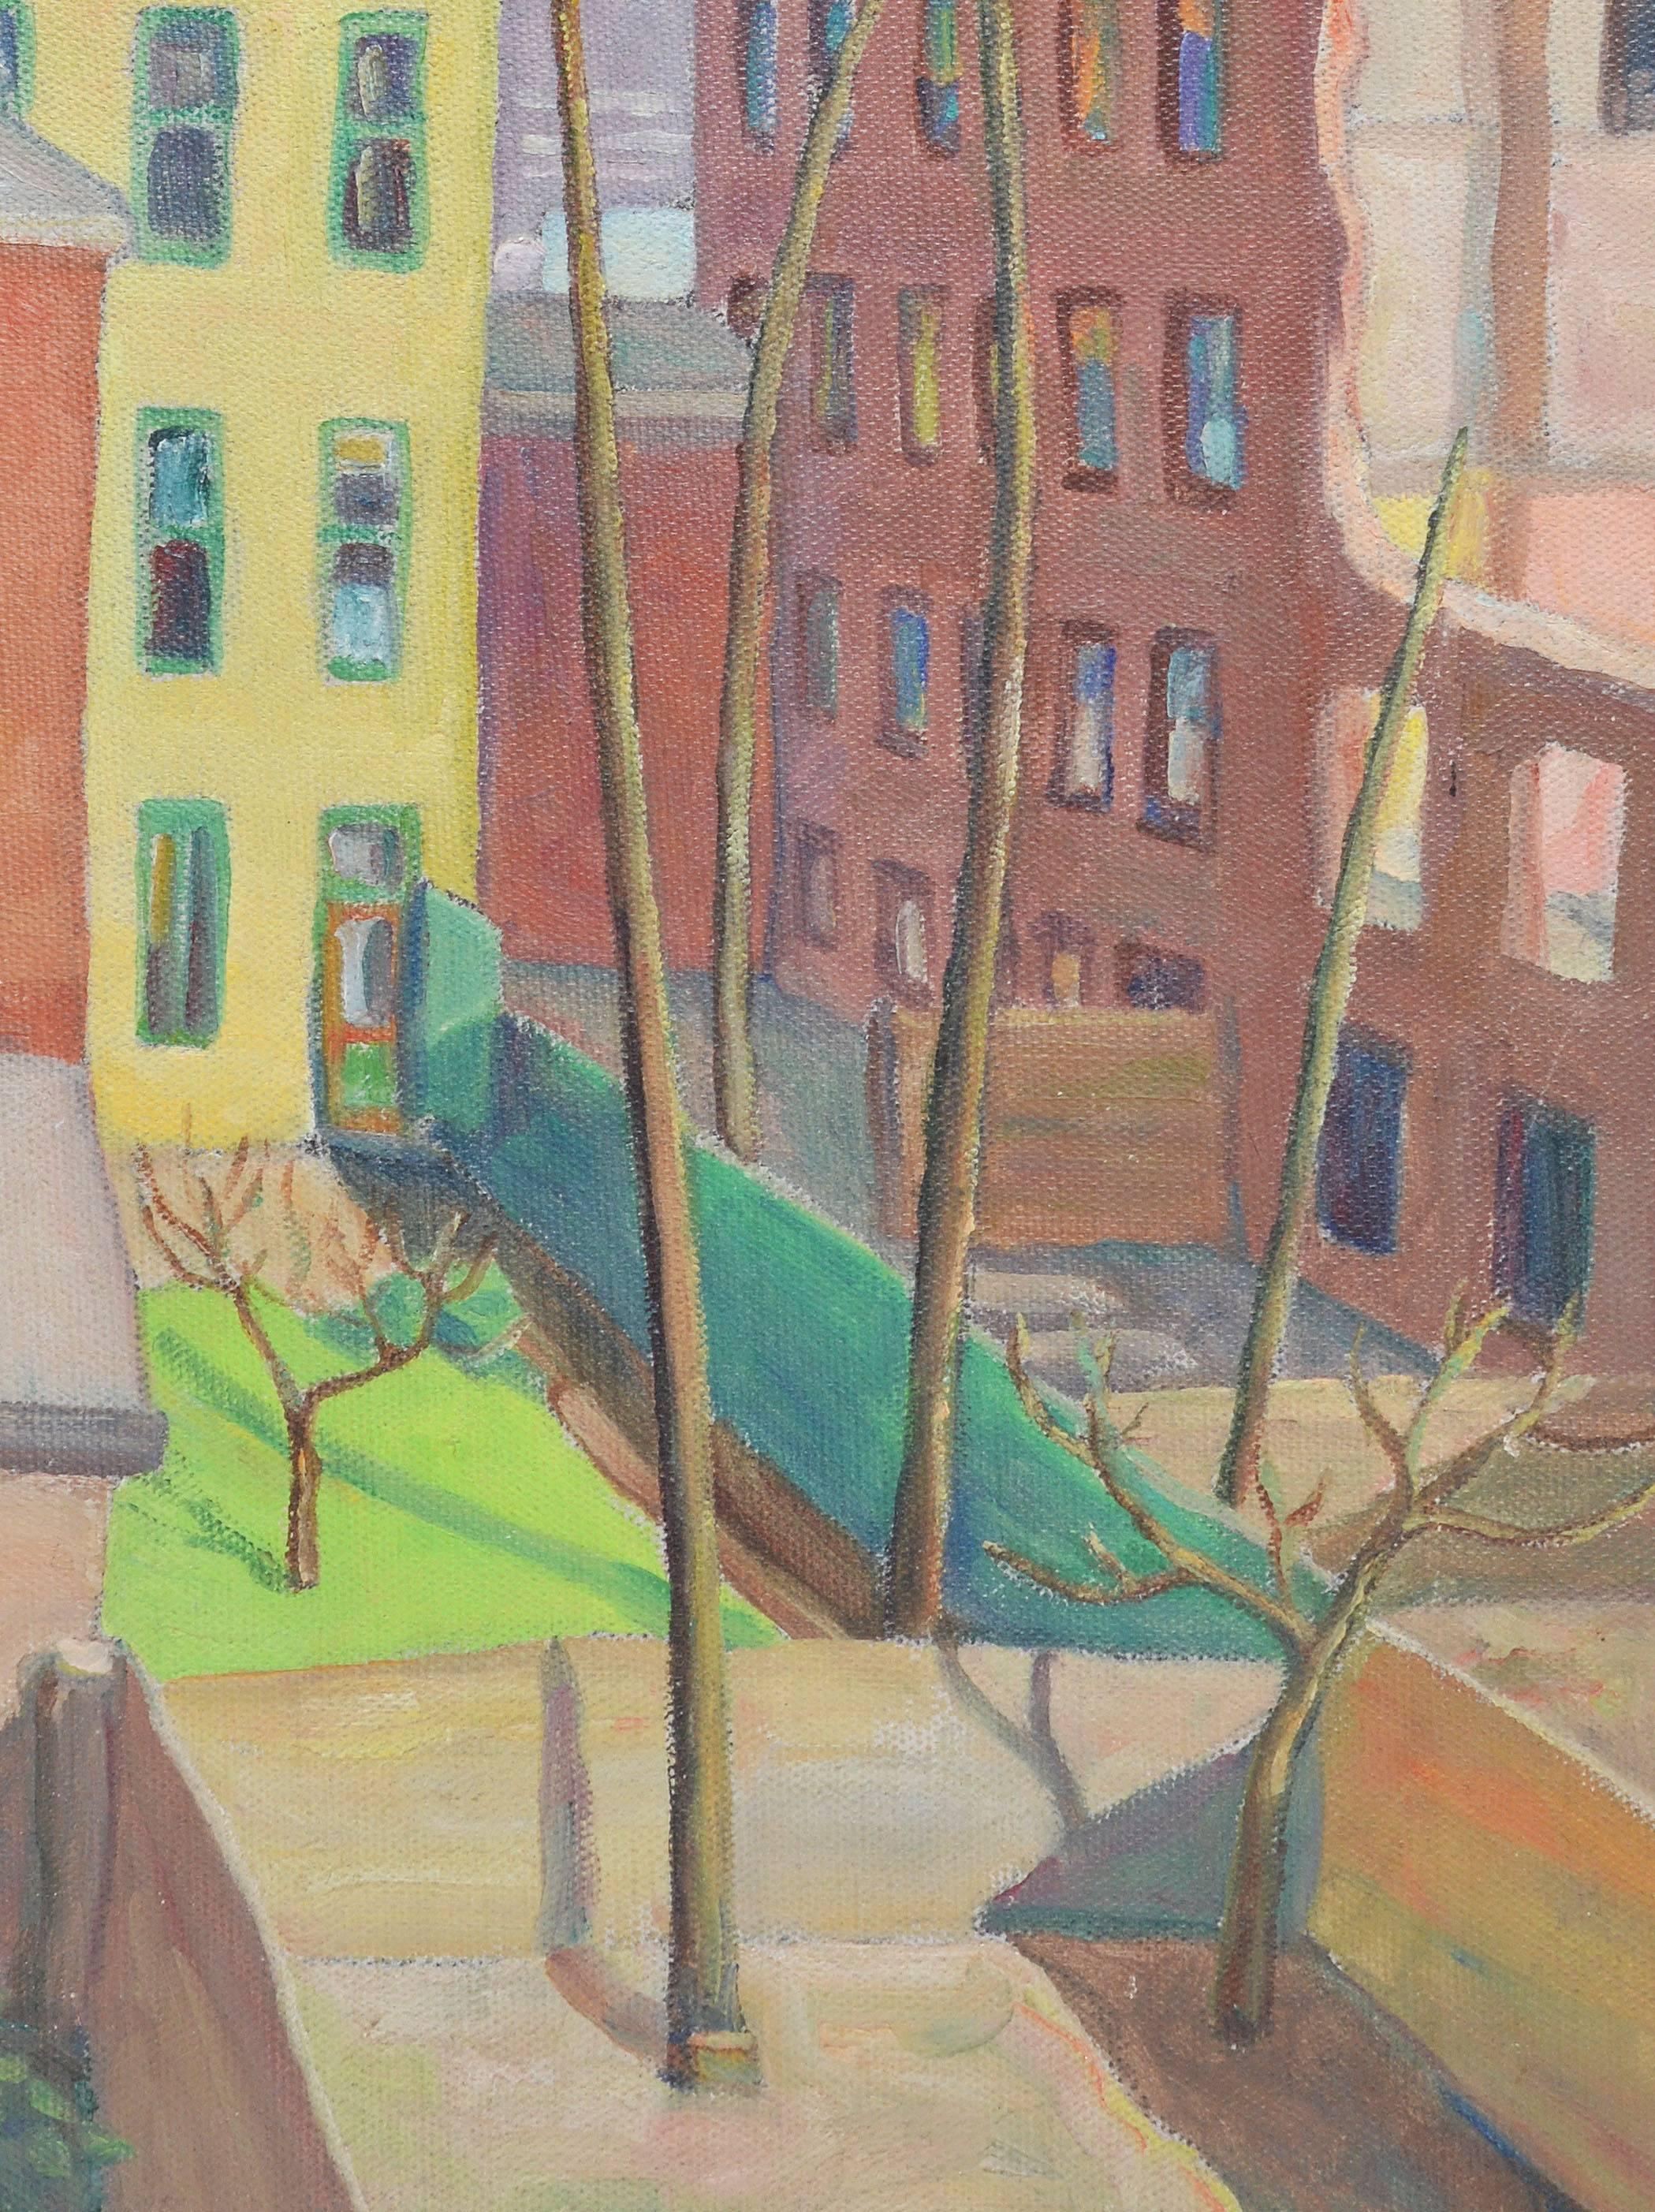 Modernist view of a cityscape.  Oil on board, circa 1940.  Unsigned.  Displayed in a black modernist frame.  Image size, 10